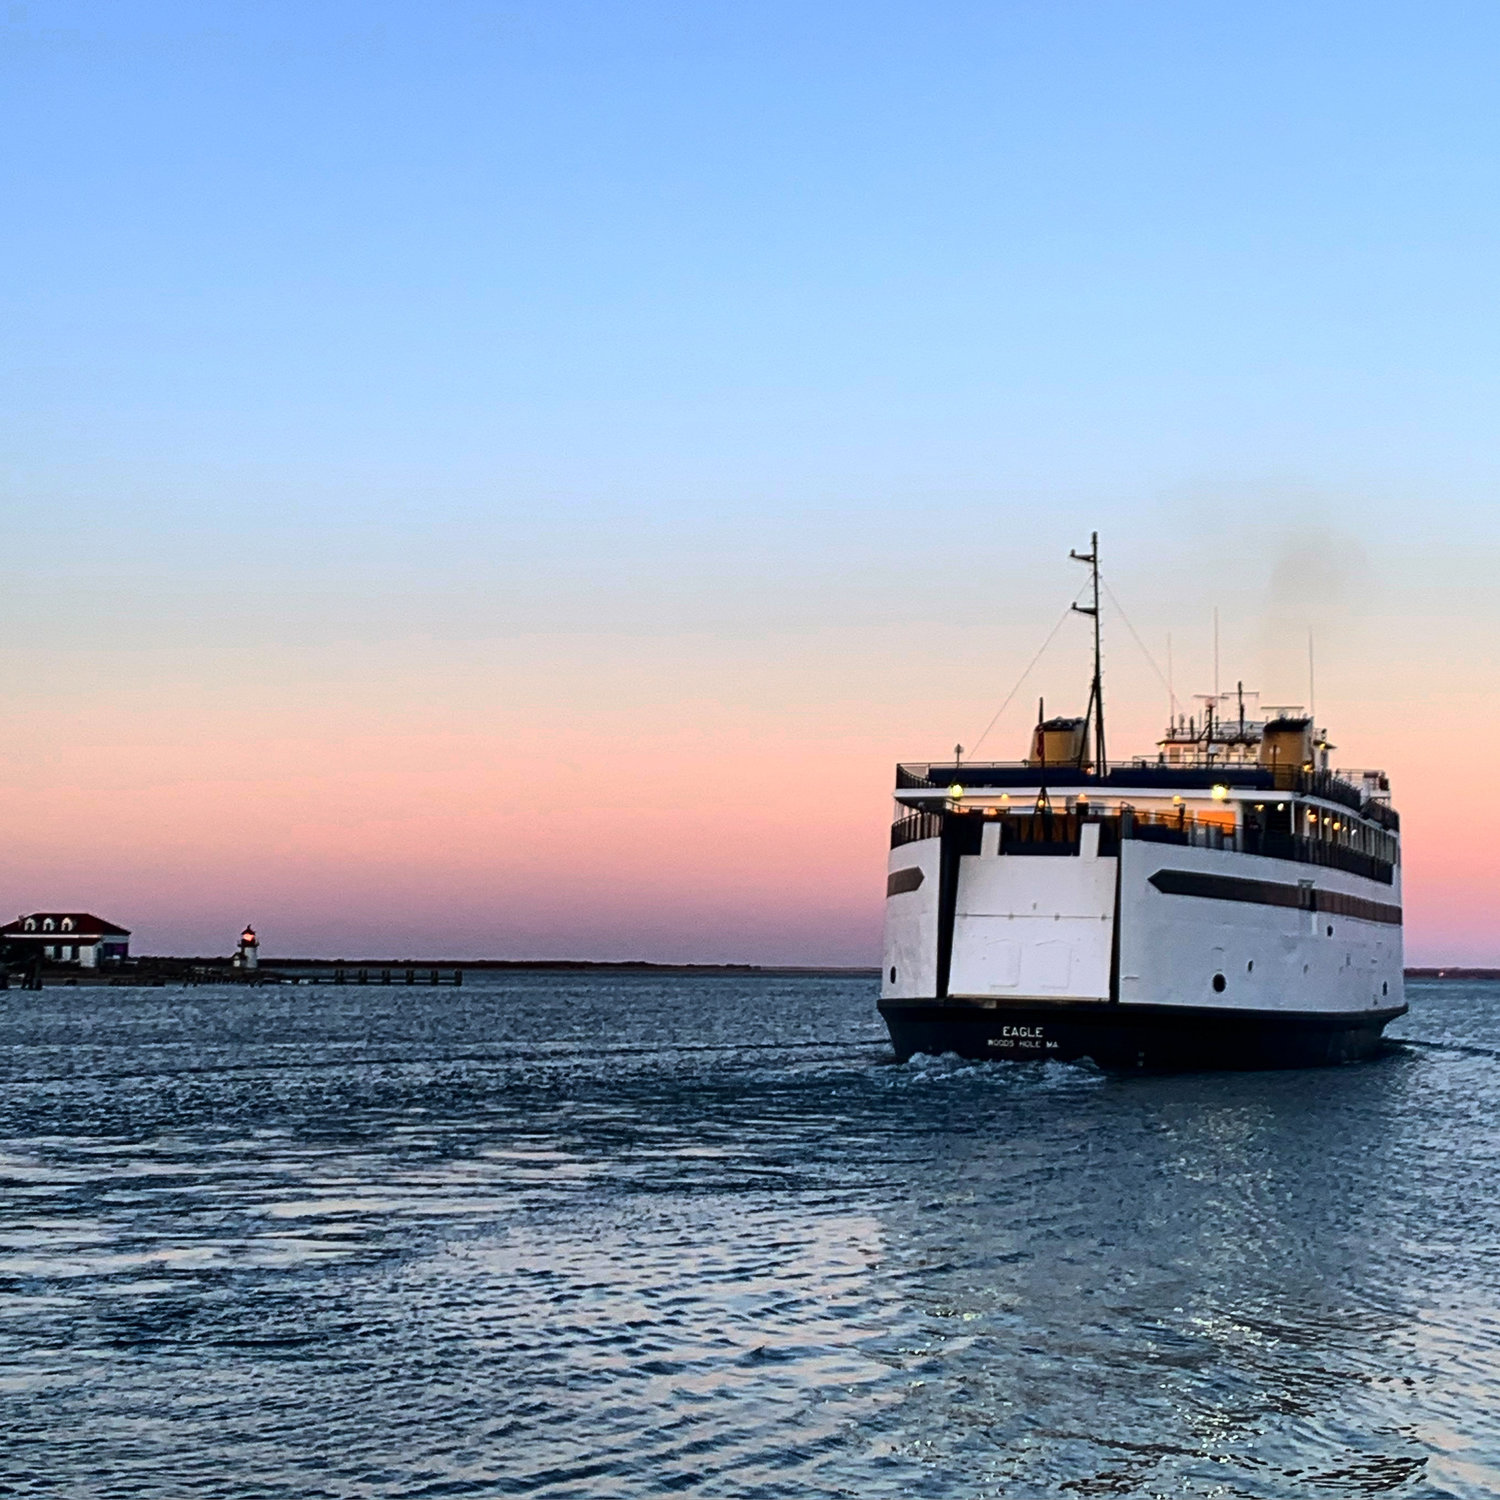 The sun rises over Nantucket Harbor as the M/V Eagle departs for Hyannis.